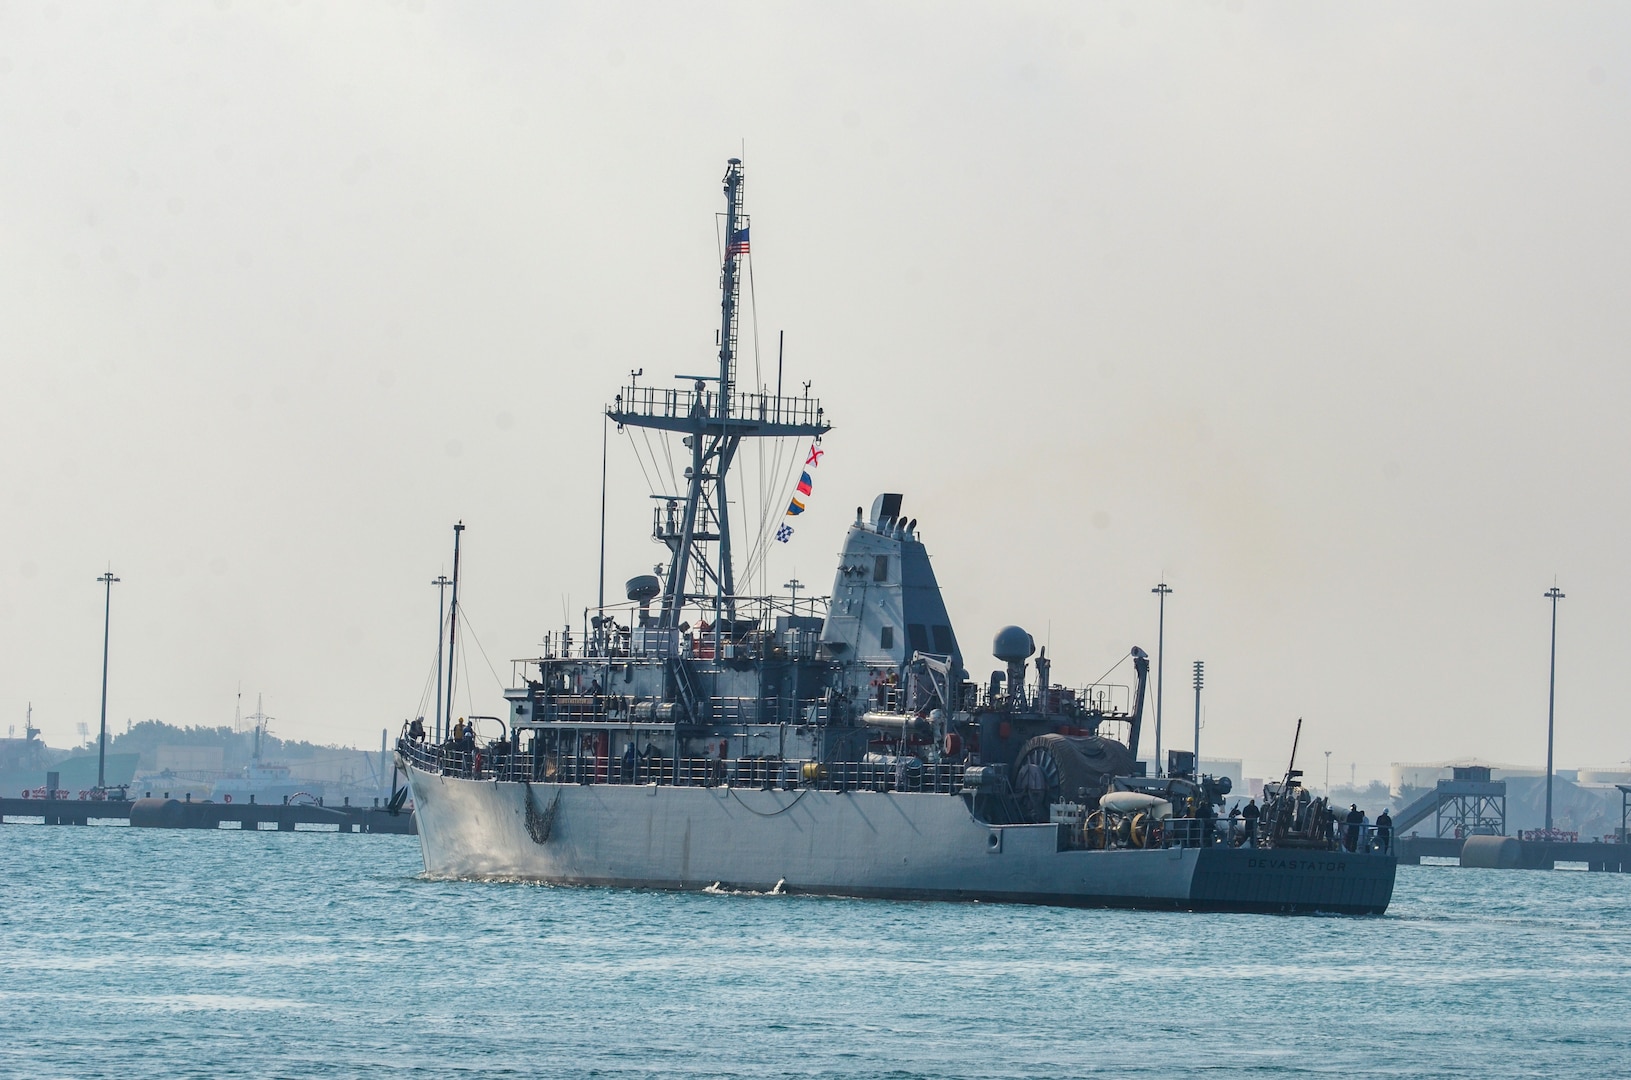 MANAMA, Bahrain (Dec. 17, 2023) U.S. Navy Avenger-class mine countermeasures ship USS Devastator (MCM 6) departs Naval Support Activity (NSA) Bahrain for sea trials, Dec. 17. NSA Bahrain enables the forward operations and responsiveness of U.S. and allied forces in support of Navy Region Europe, Africa, Southwest Asia's mission to provide services to the fleet, warfighter and family. (U.S. Navy photo by Mass Communication Specialist 2nd Class MacAdam Kane Weissman)